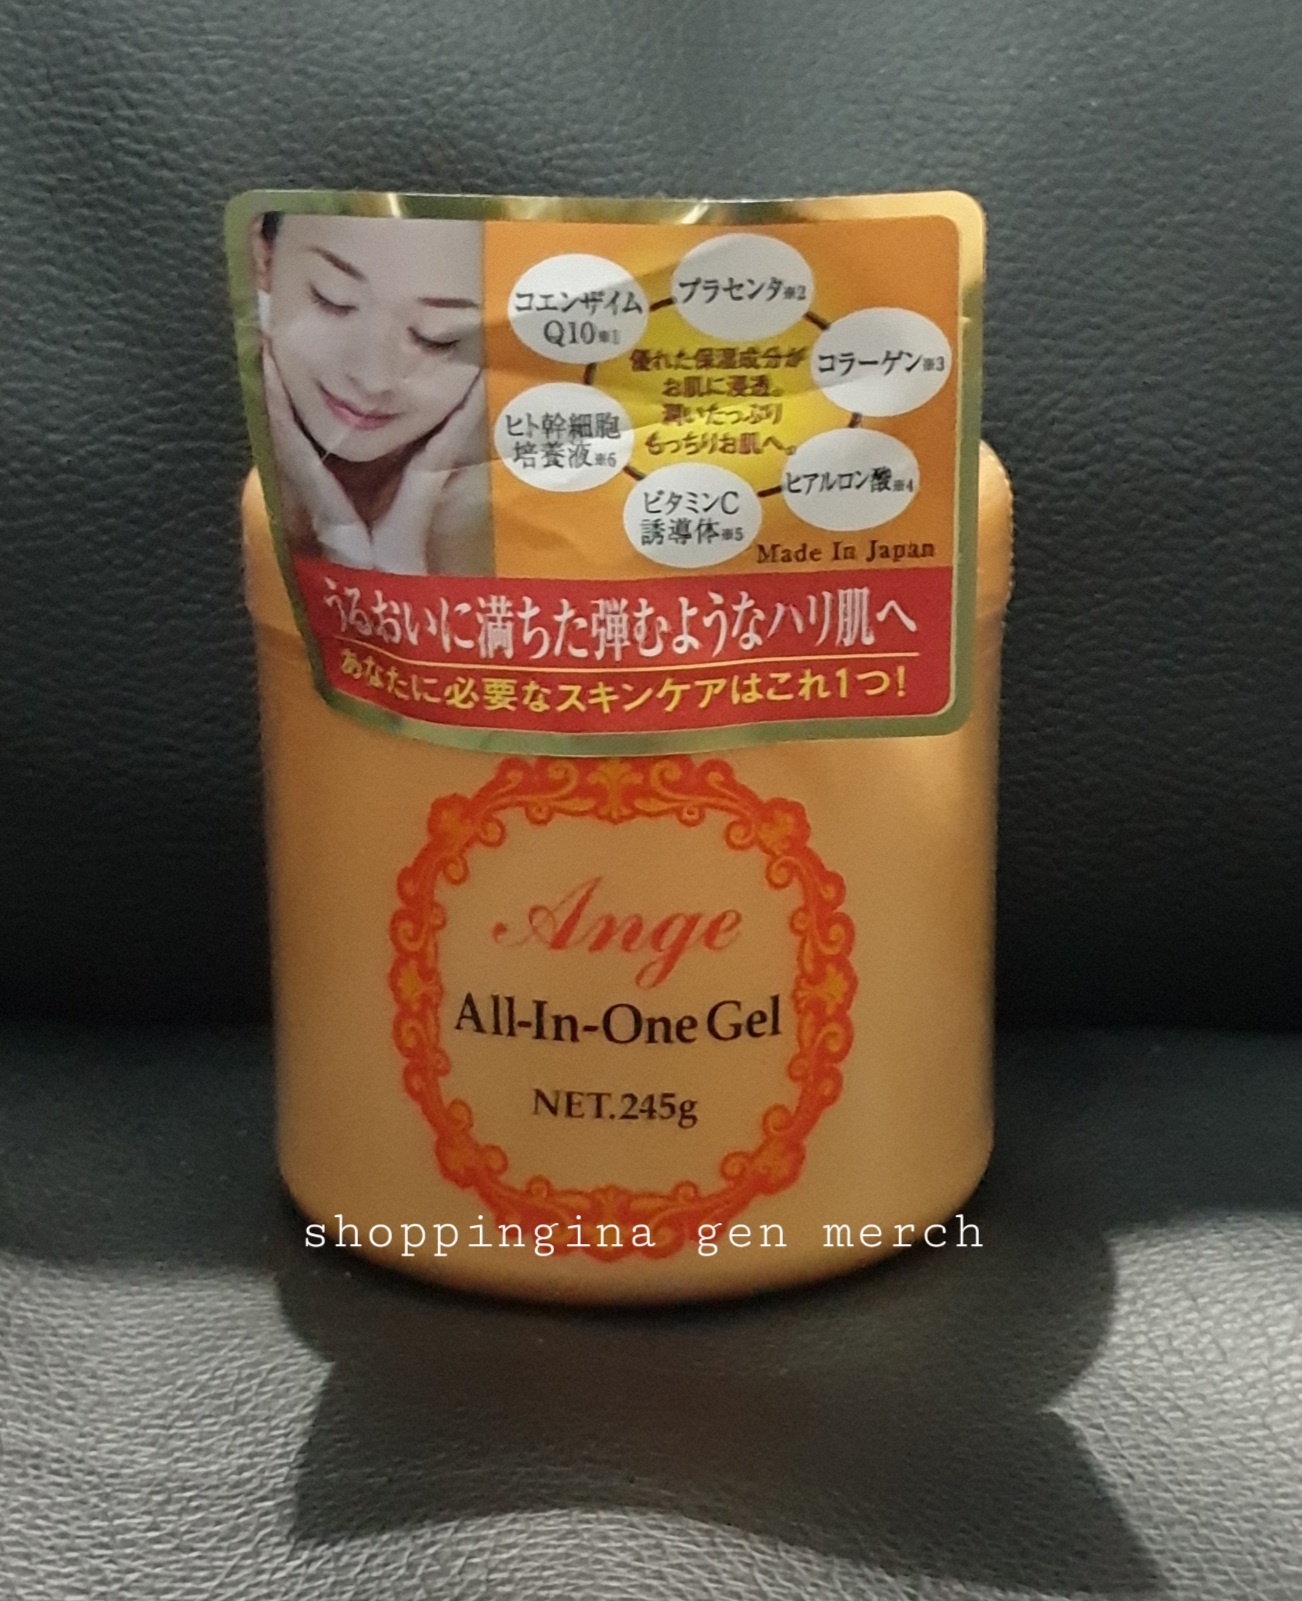 Japan Ange All in One Gel sheep placenta extract, collagen